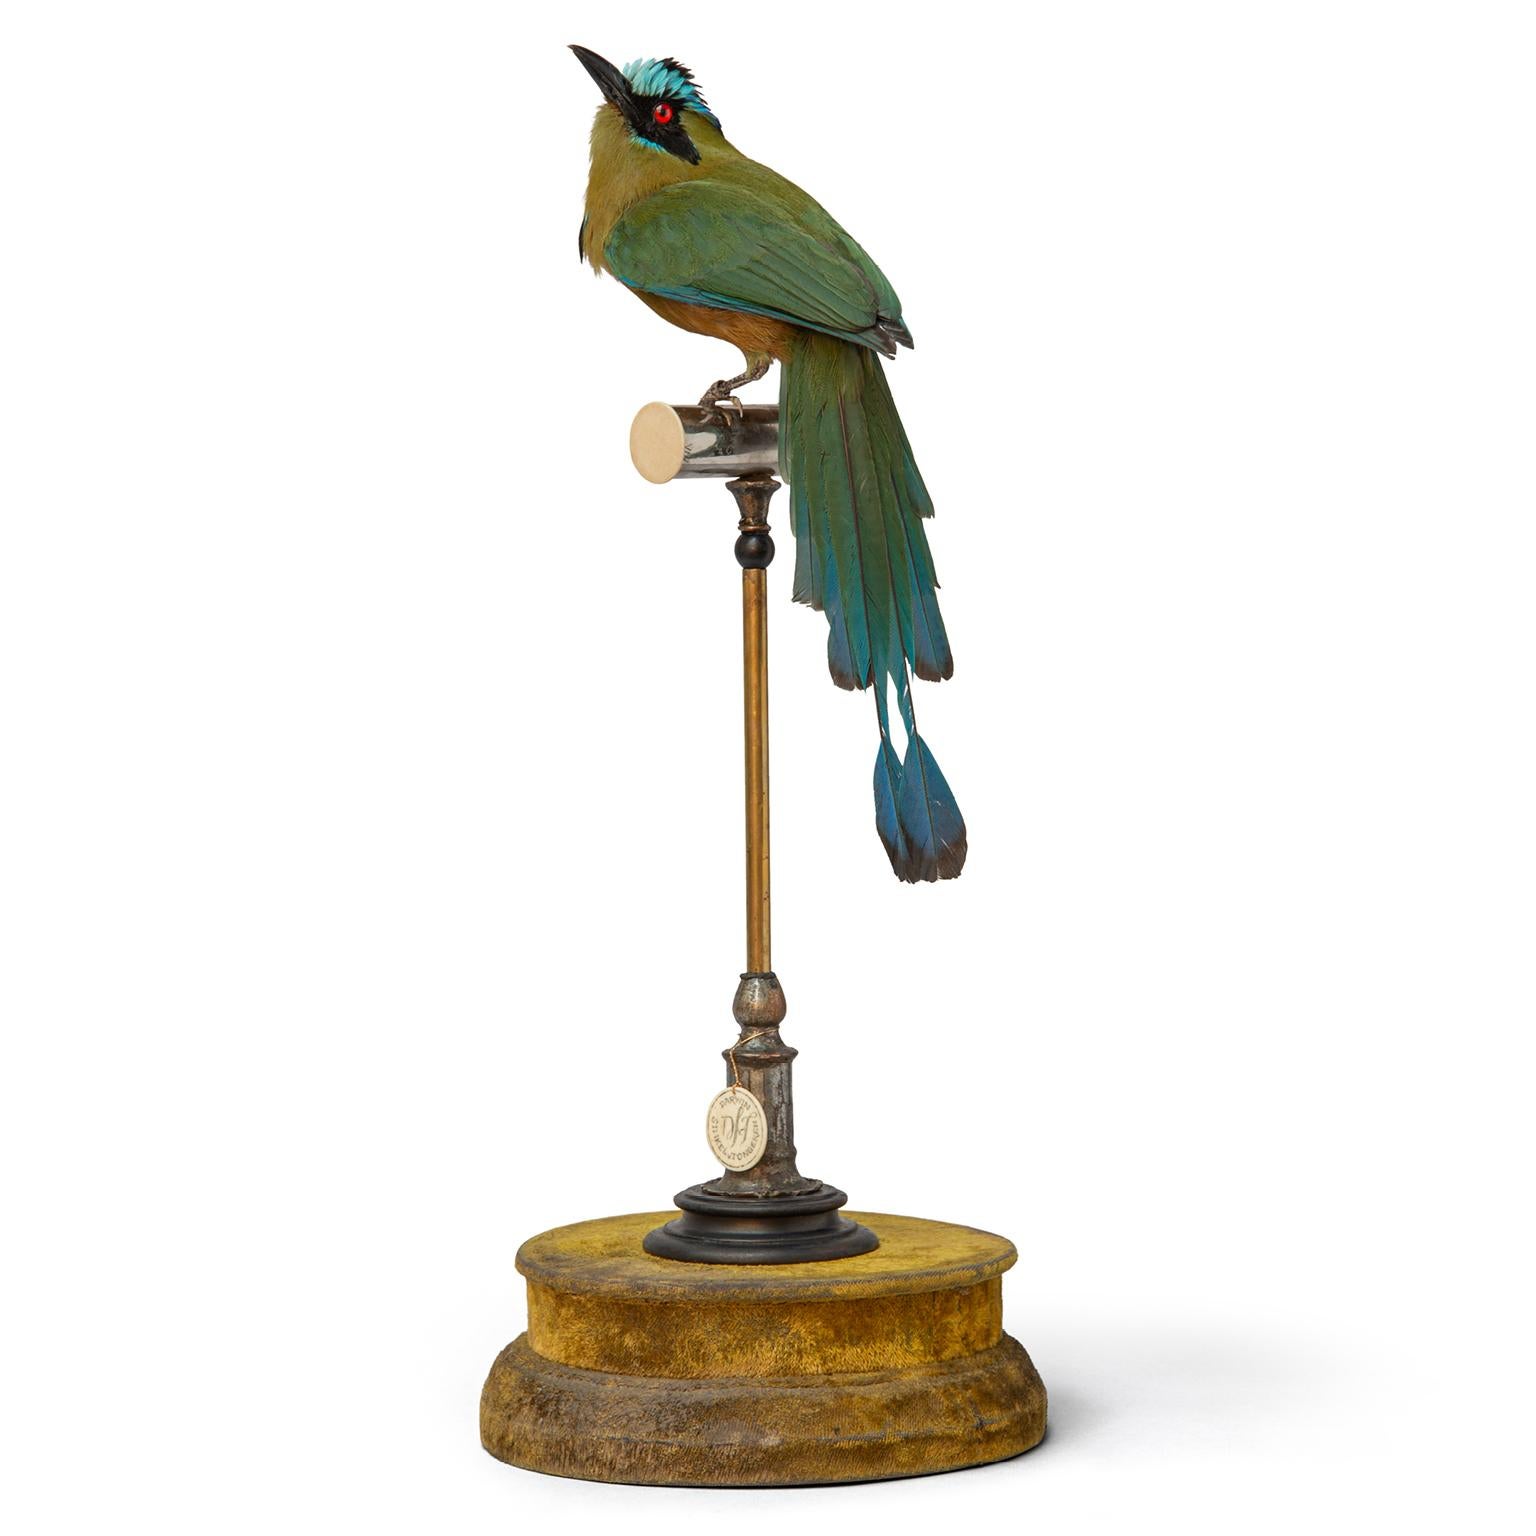 This colorful Motmot (Momotus coeruliceps) by Sinke & van Tongeren sits on a bespoke velvet and brass plinth. Showing off its beautiful tail feathers and bright blue capped head. It comes with a large glass dome. Smaller domes available on